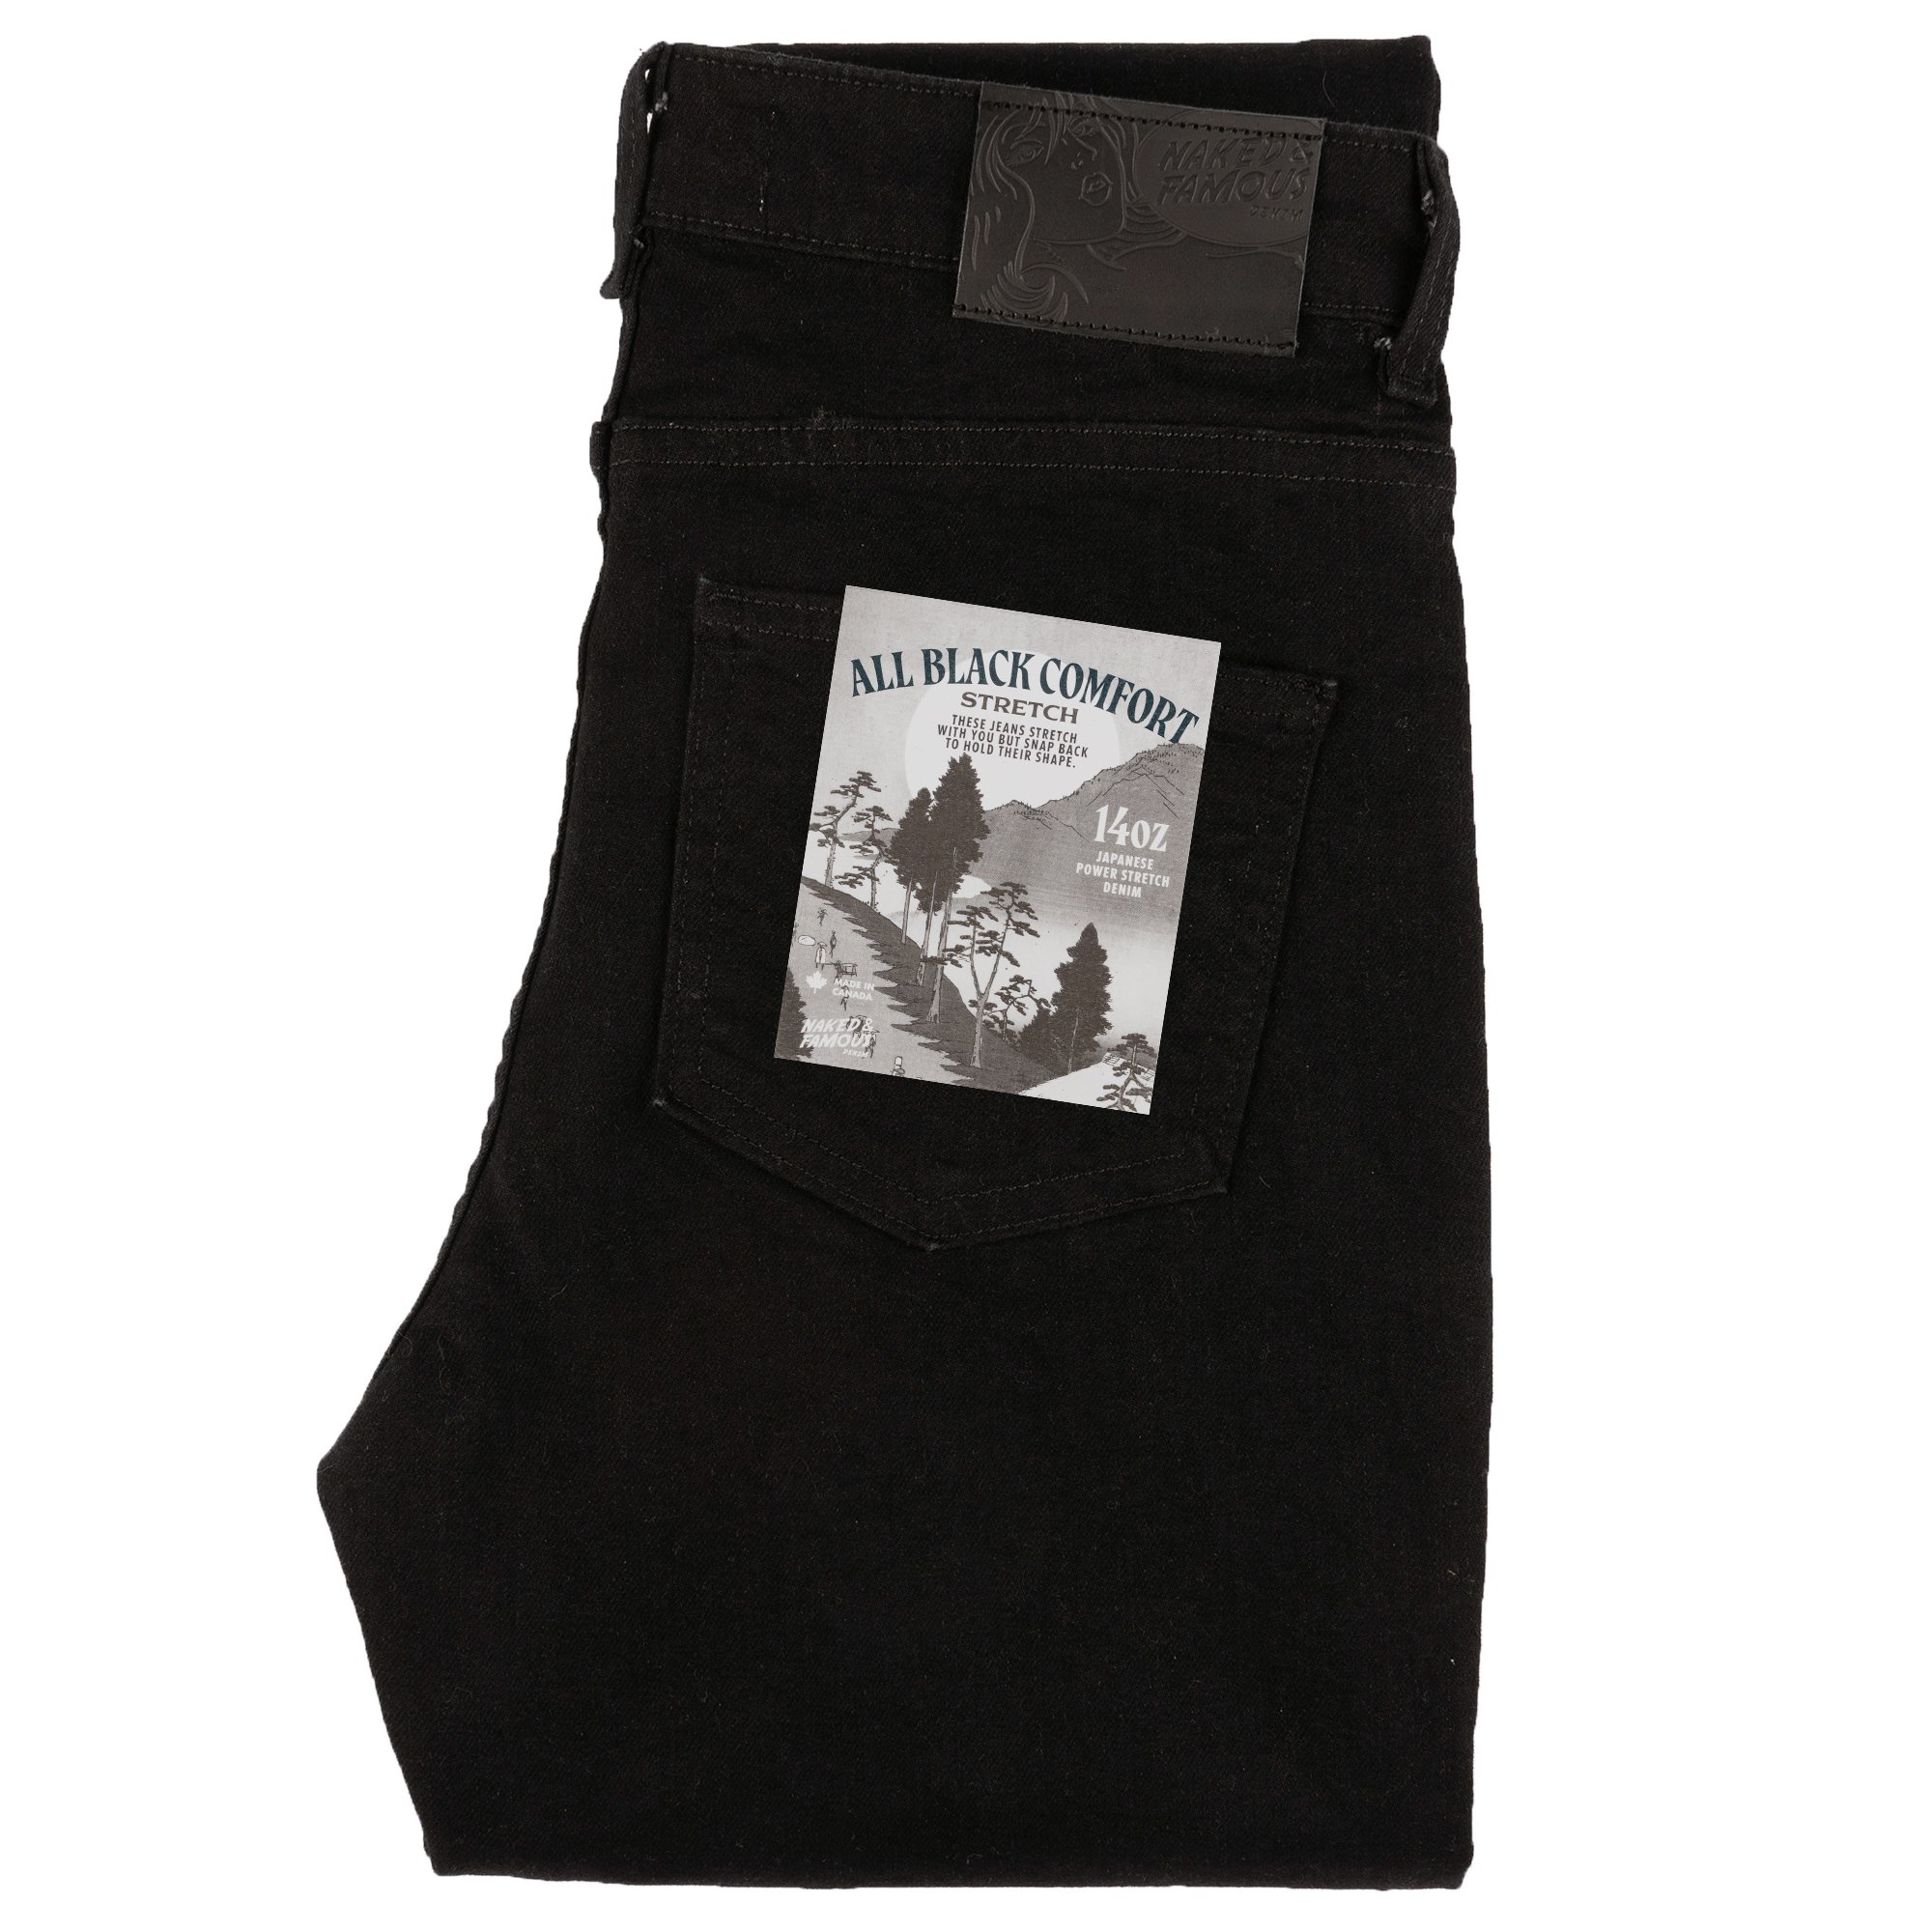  All Black Comfort Stretch - Women’s Jeans 